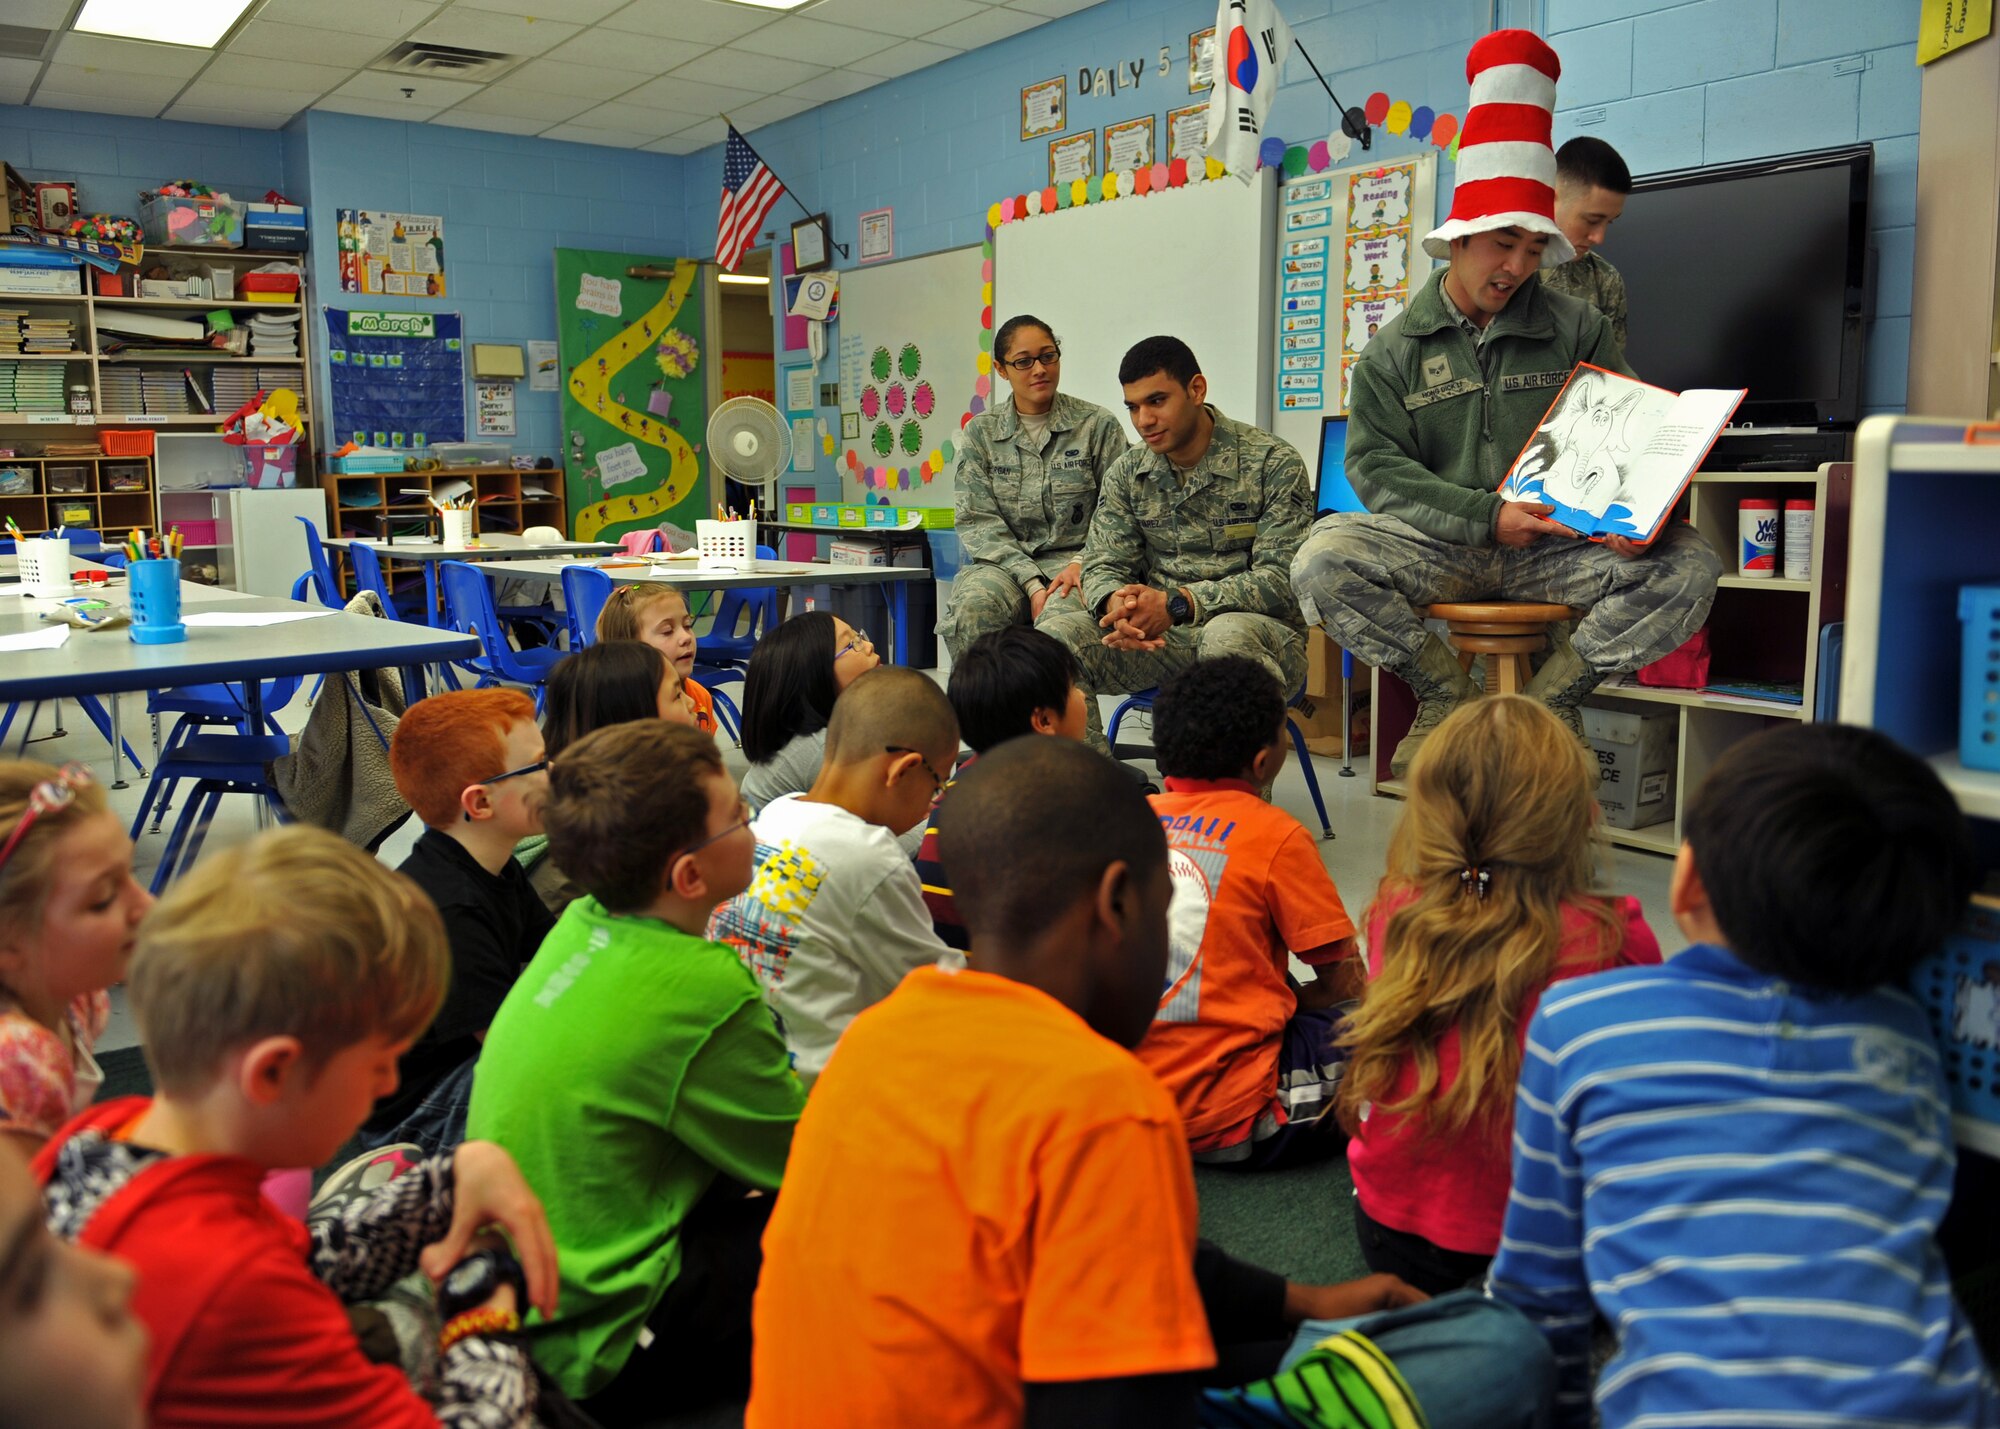 Senior Airman Hong Dick Li, a member of the 51st Security Forces Squadron, reads a book to third-grade students during Read Across America Day in celebration of Dr. Seuss’ Birthday at Osan Air Base, Republic of Korea, March 5, 2014. Li and other Airmen read to multiple Osan American Elementary School students in kindergarten through fifth grade. (U.S. Air Force photo/Senior Airman Siuta B. Ika)